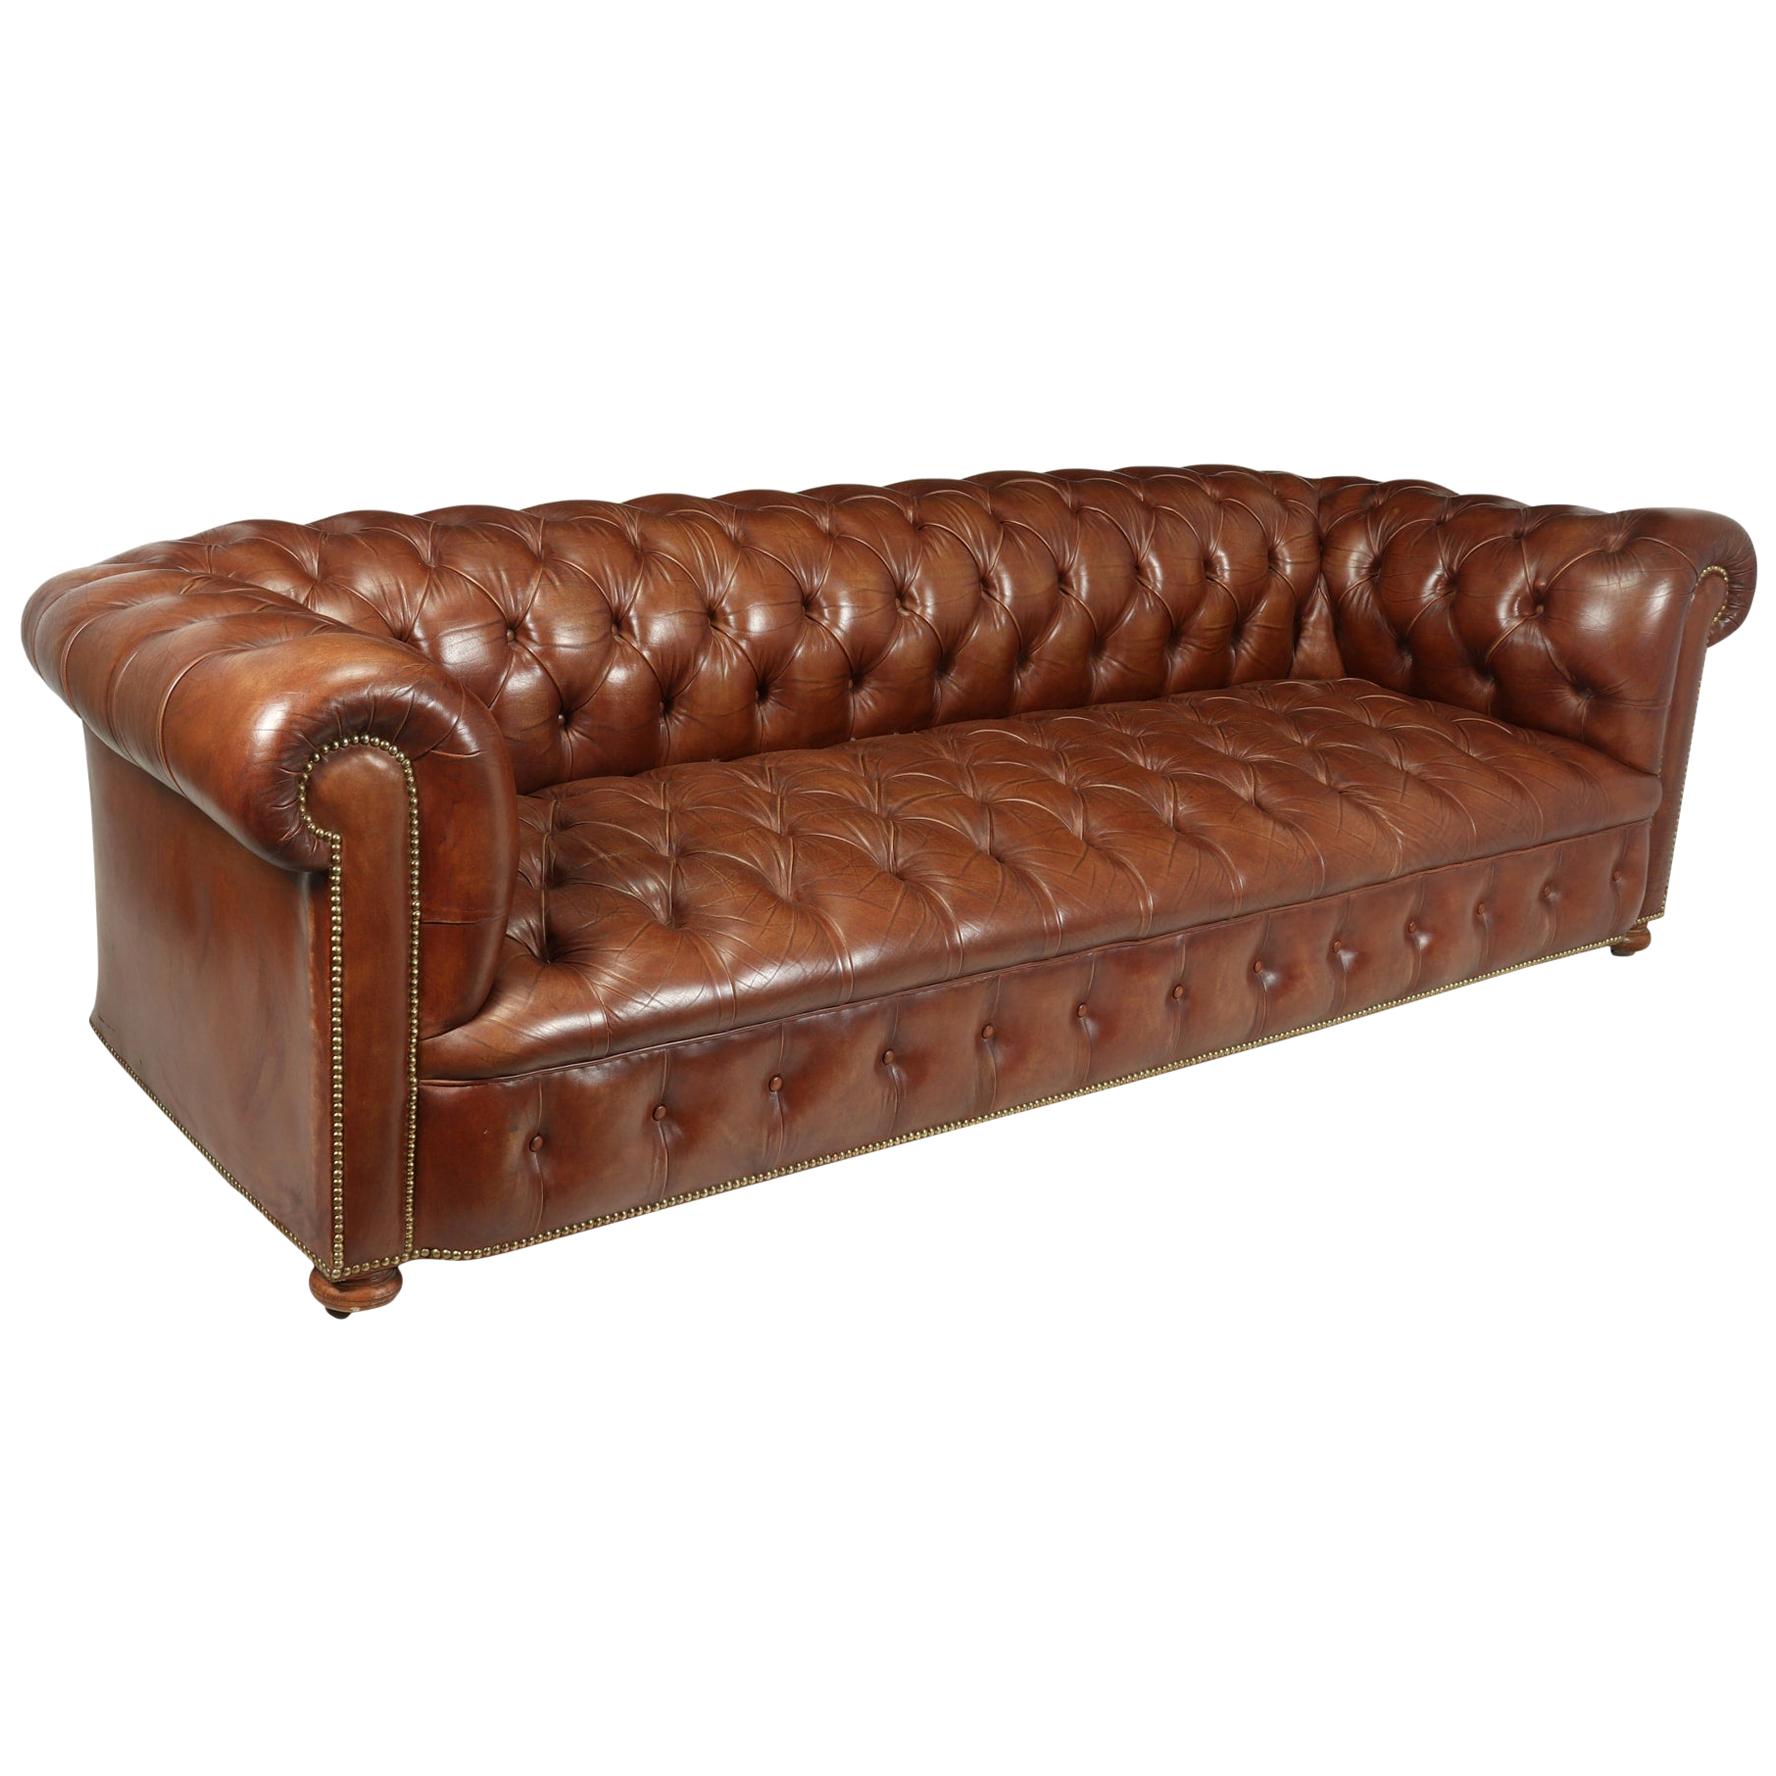 Vintage Leather Chesterfield Sofa 4 seat